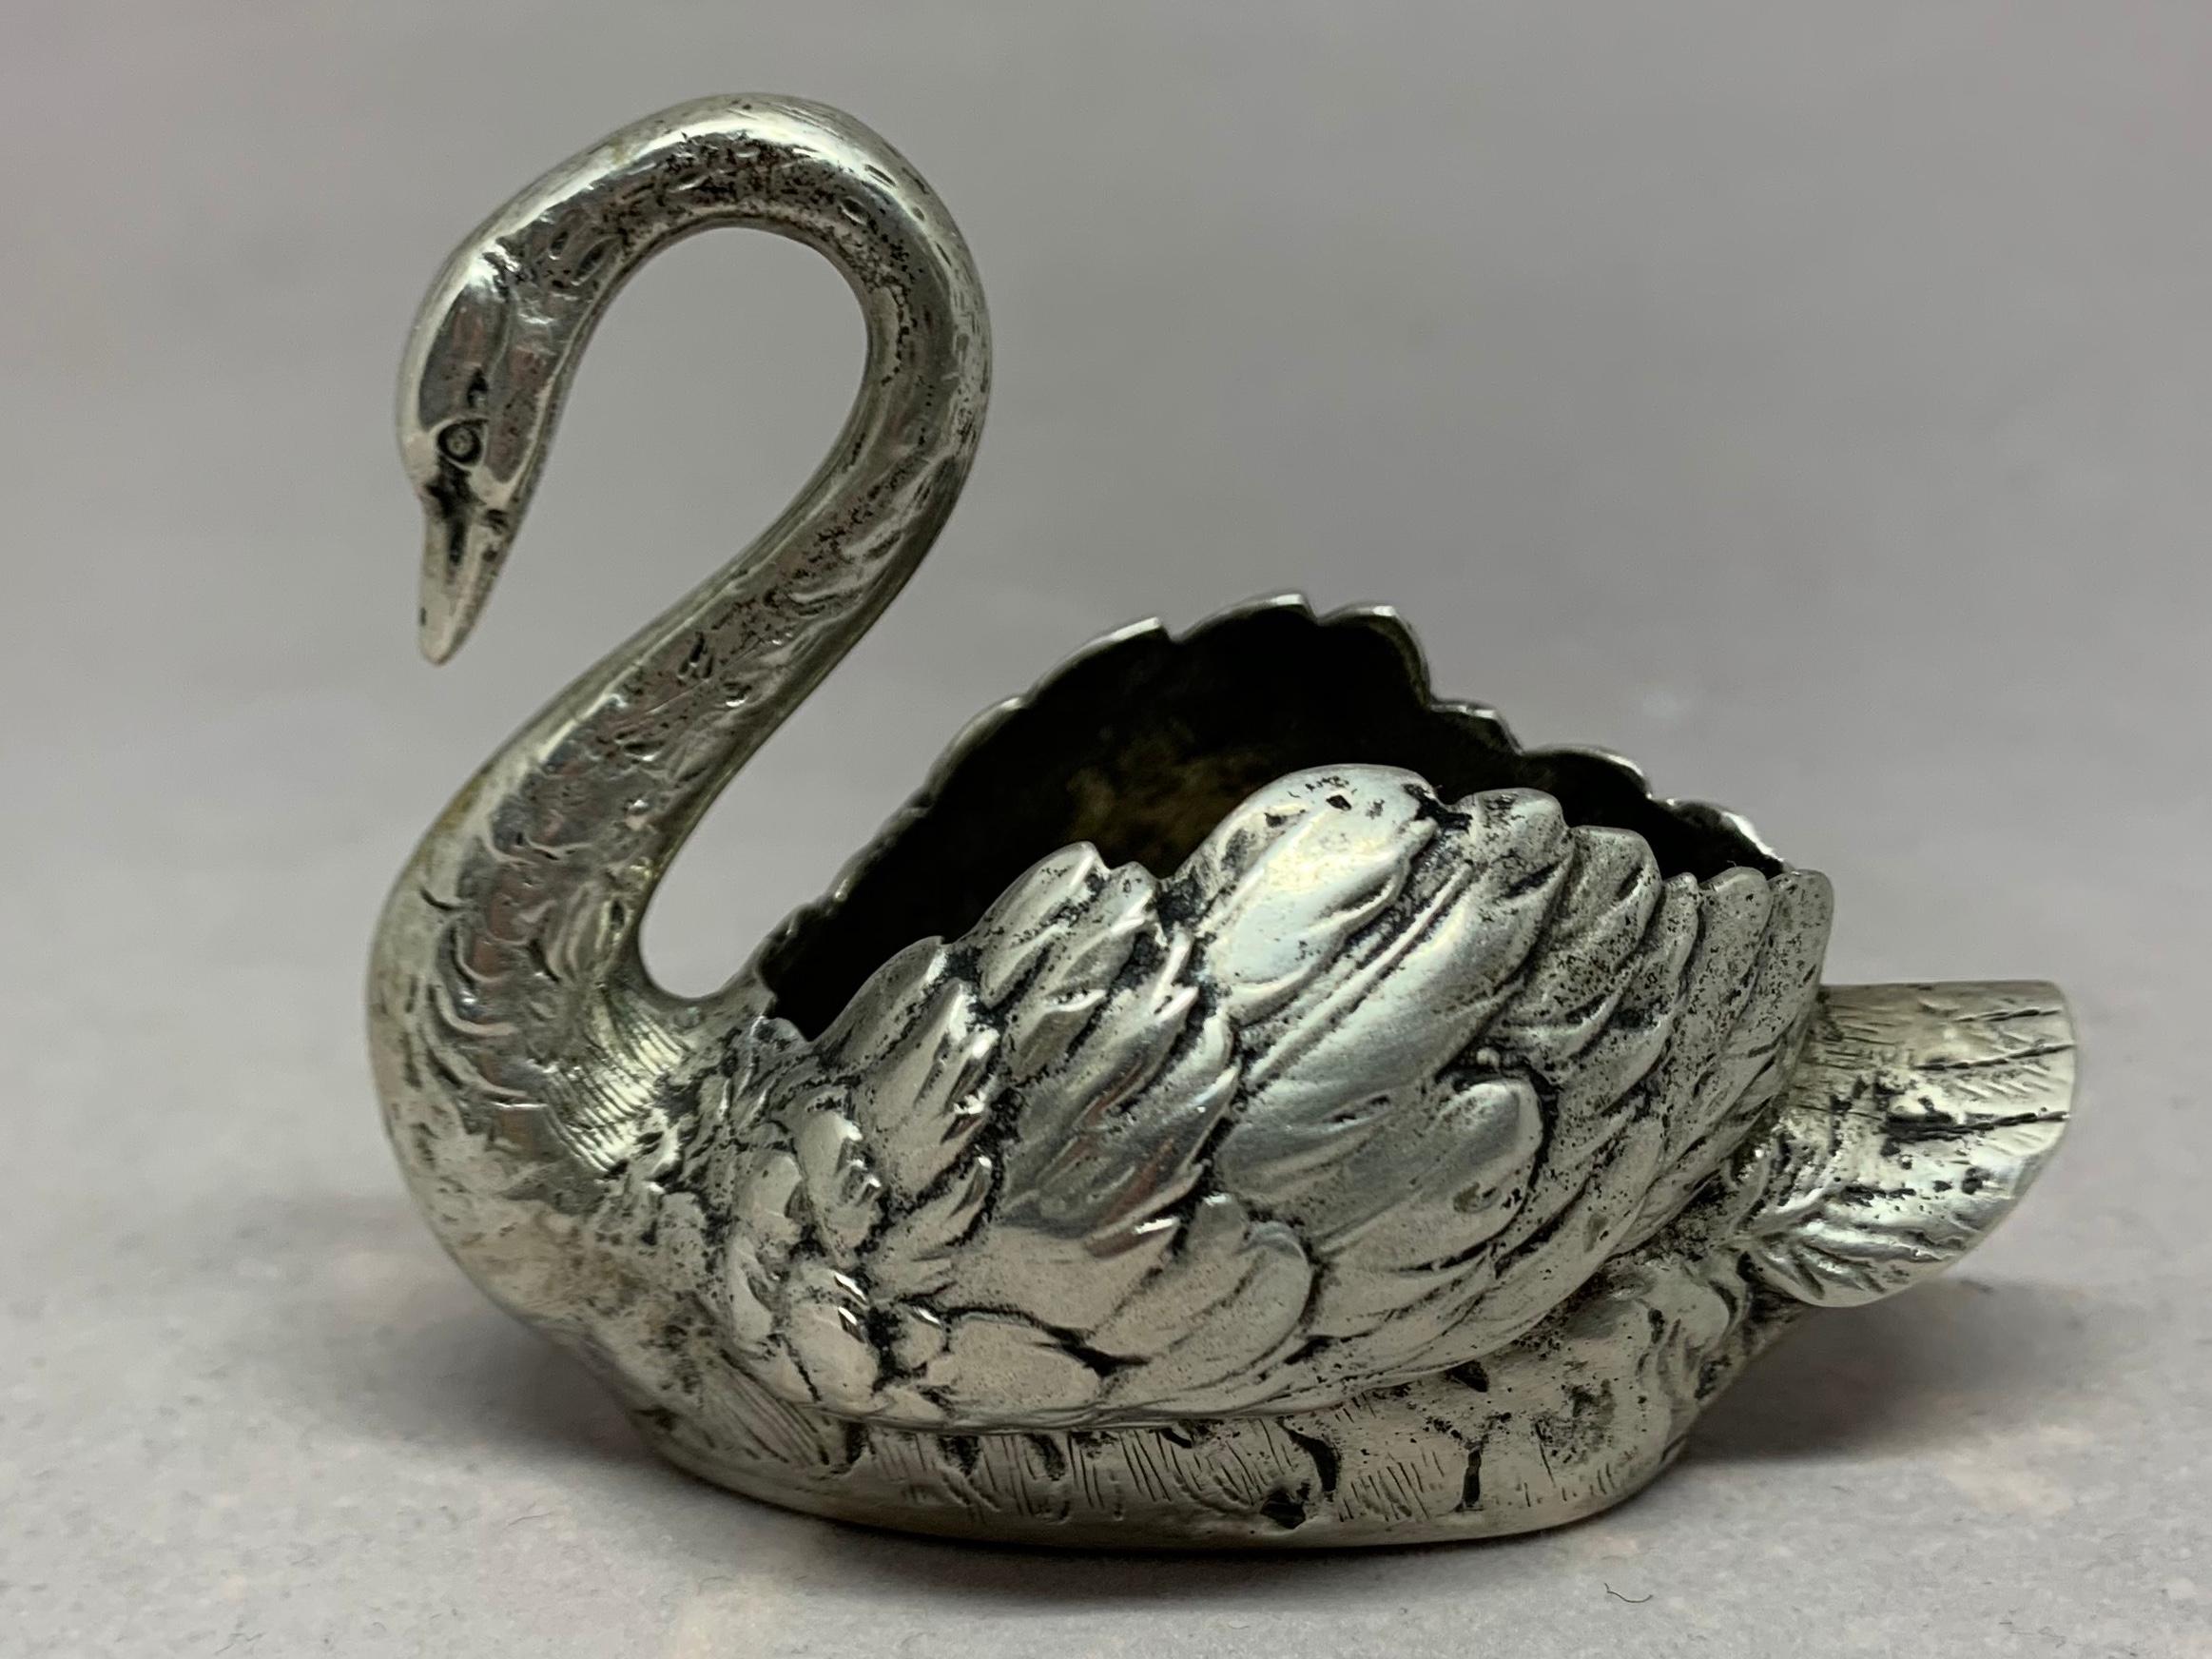 Sterling silver swan elegant Italian silver swan table salt or tablescape decor. Vintage graceful swan with sterling hallmarks manufactured by Fratelli Coppini Florence. Italy, early 20th century.
Dimensions: 2.88